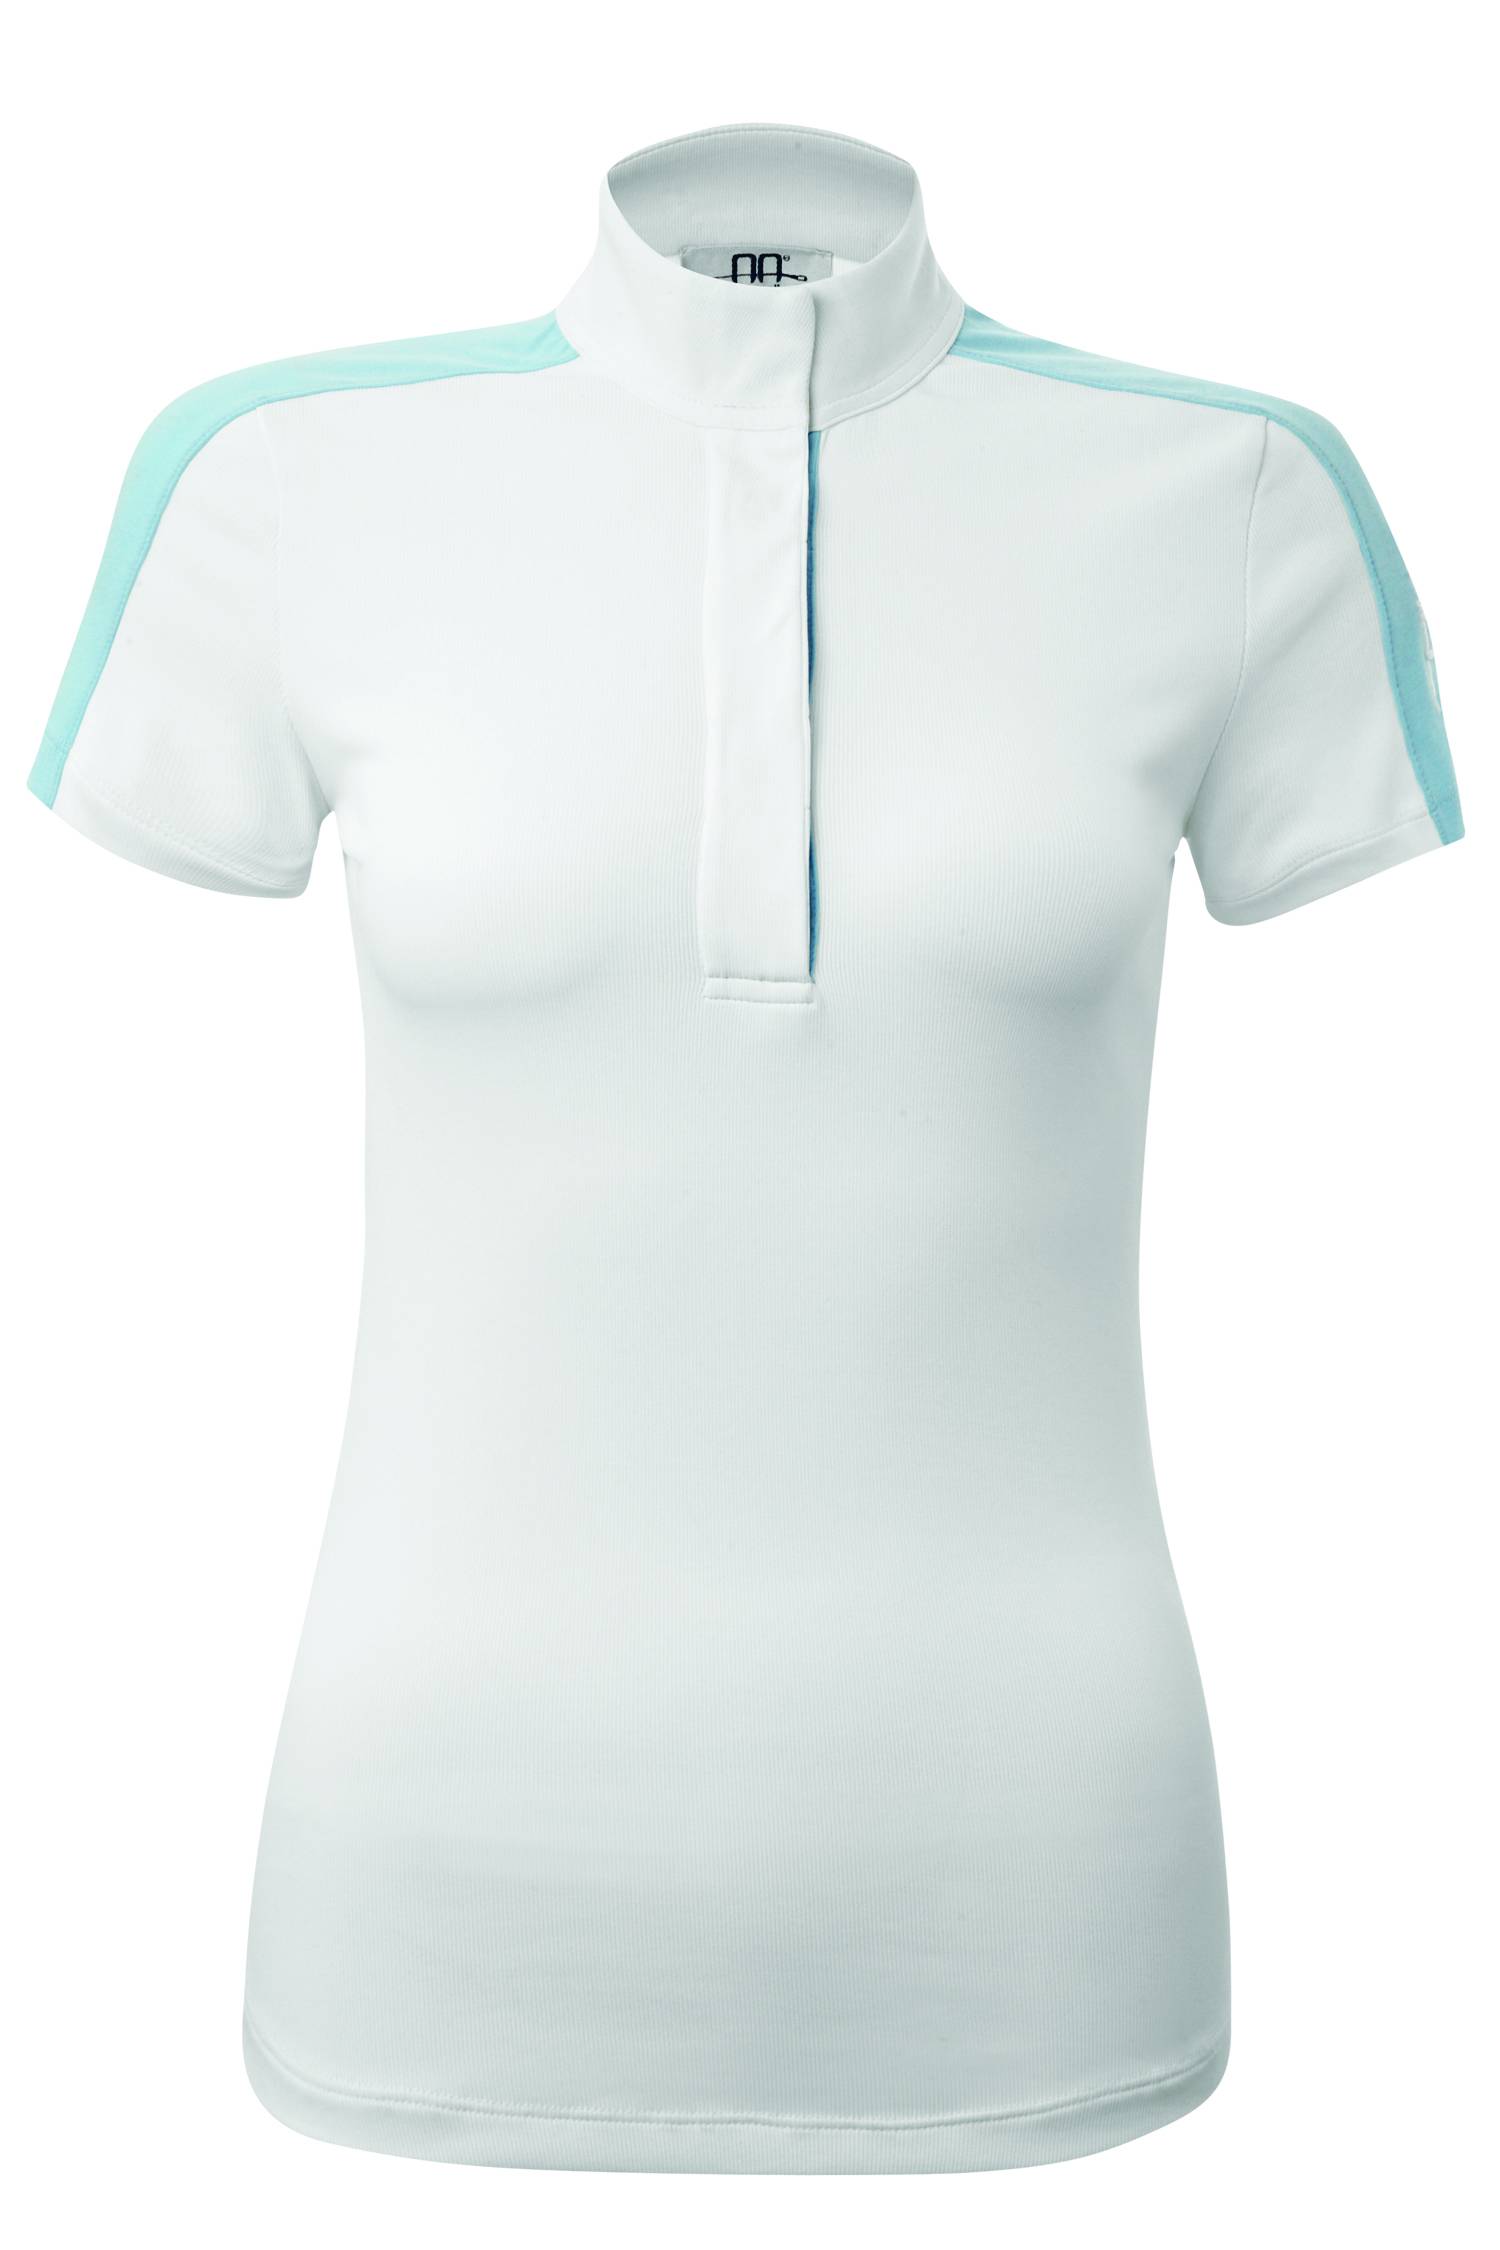 Alessandro Albanese Ladies Polo Competition Top Short Sleeve